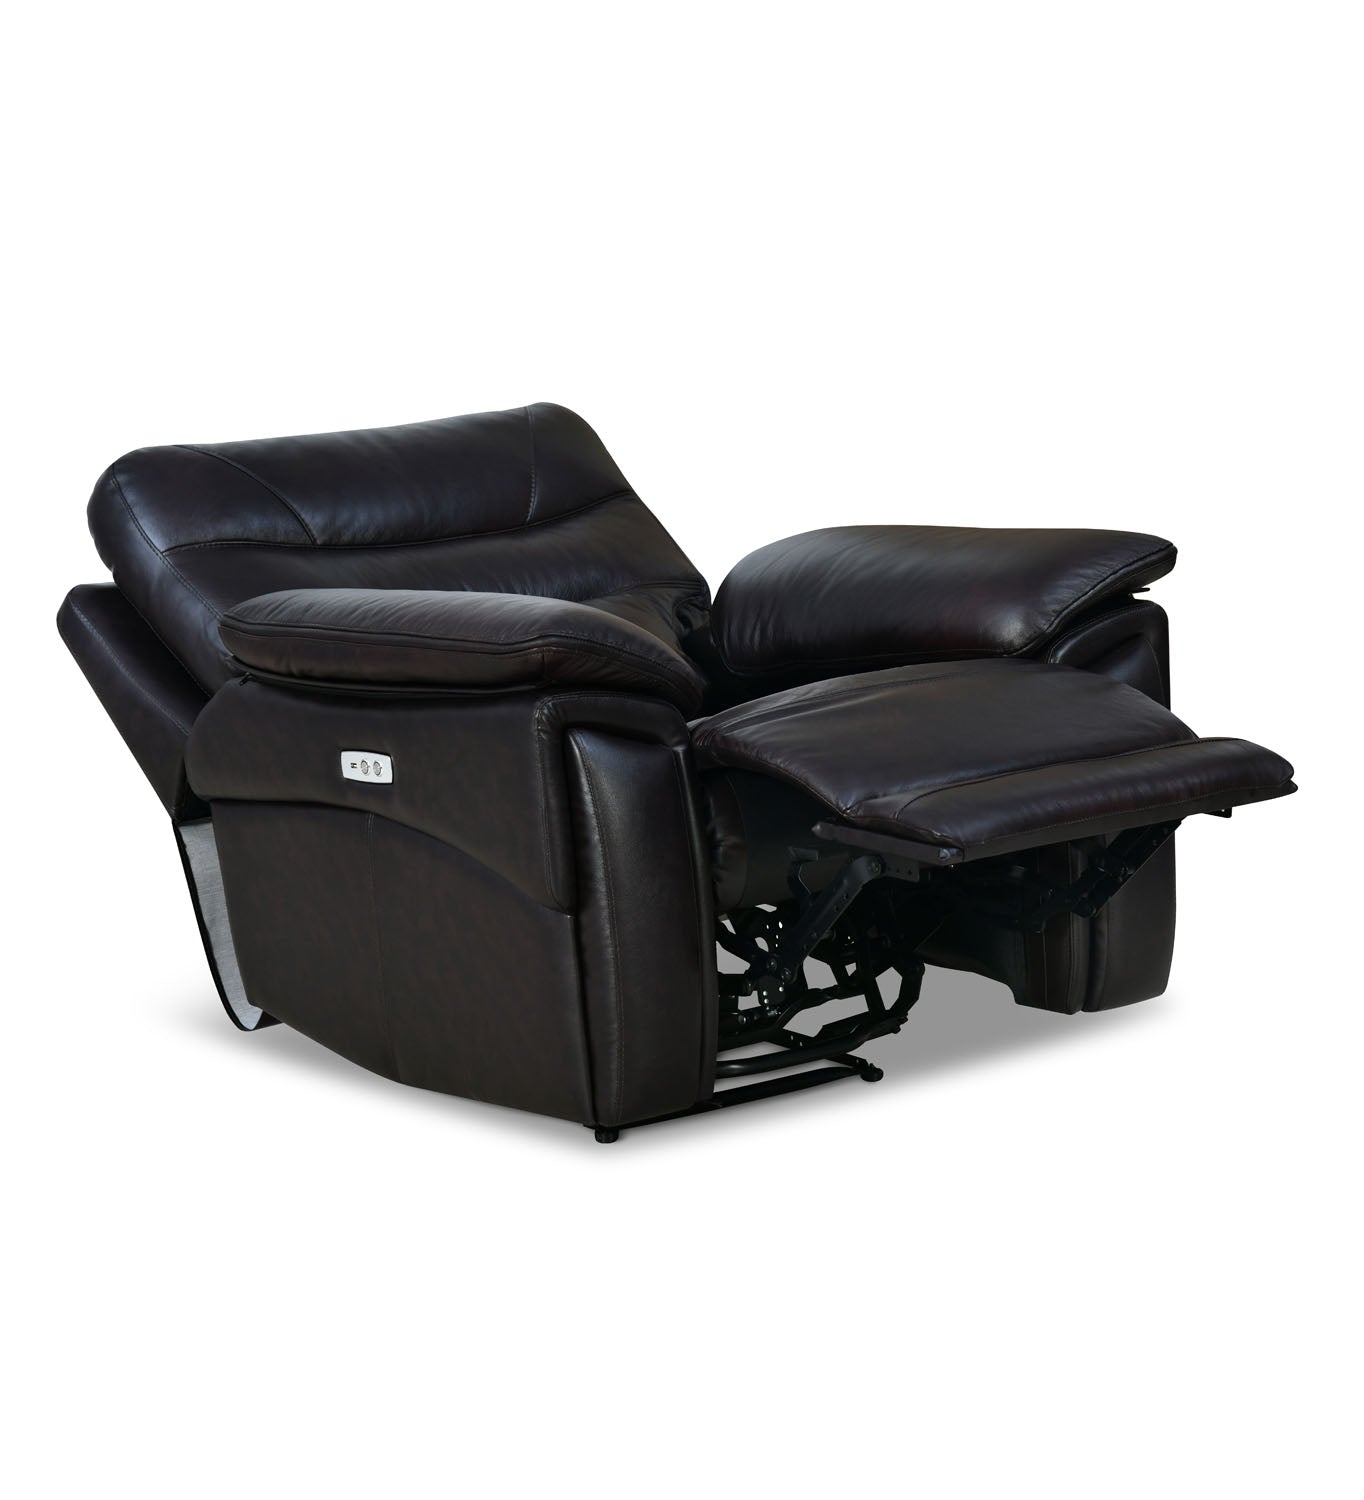 Bakewell 1 Seater Leather Powered Recliner (Brown)